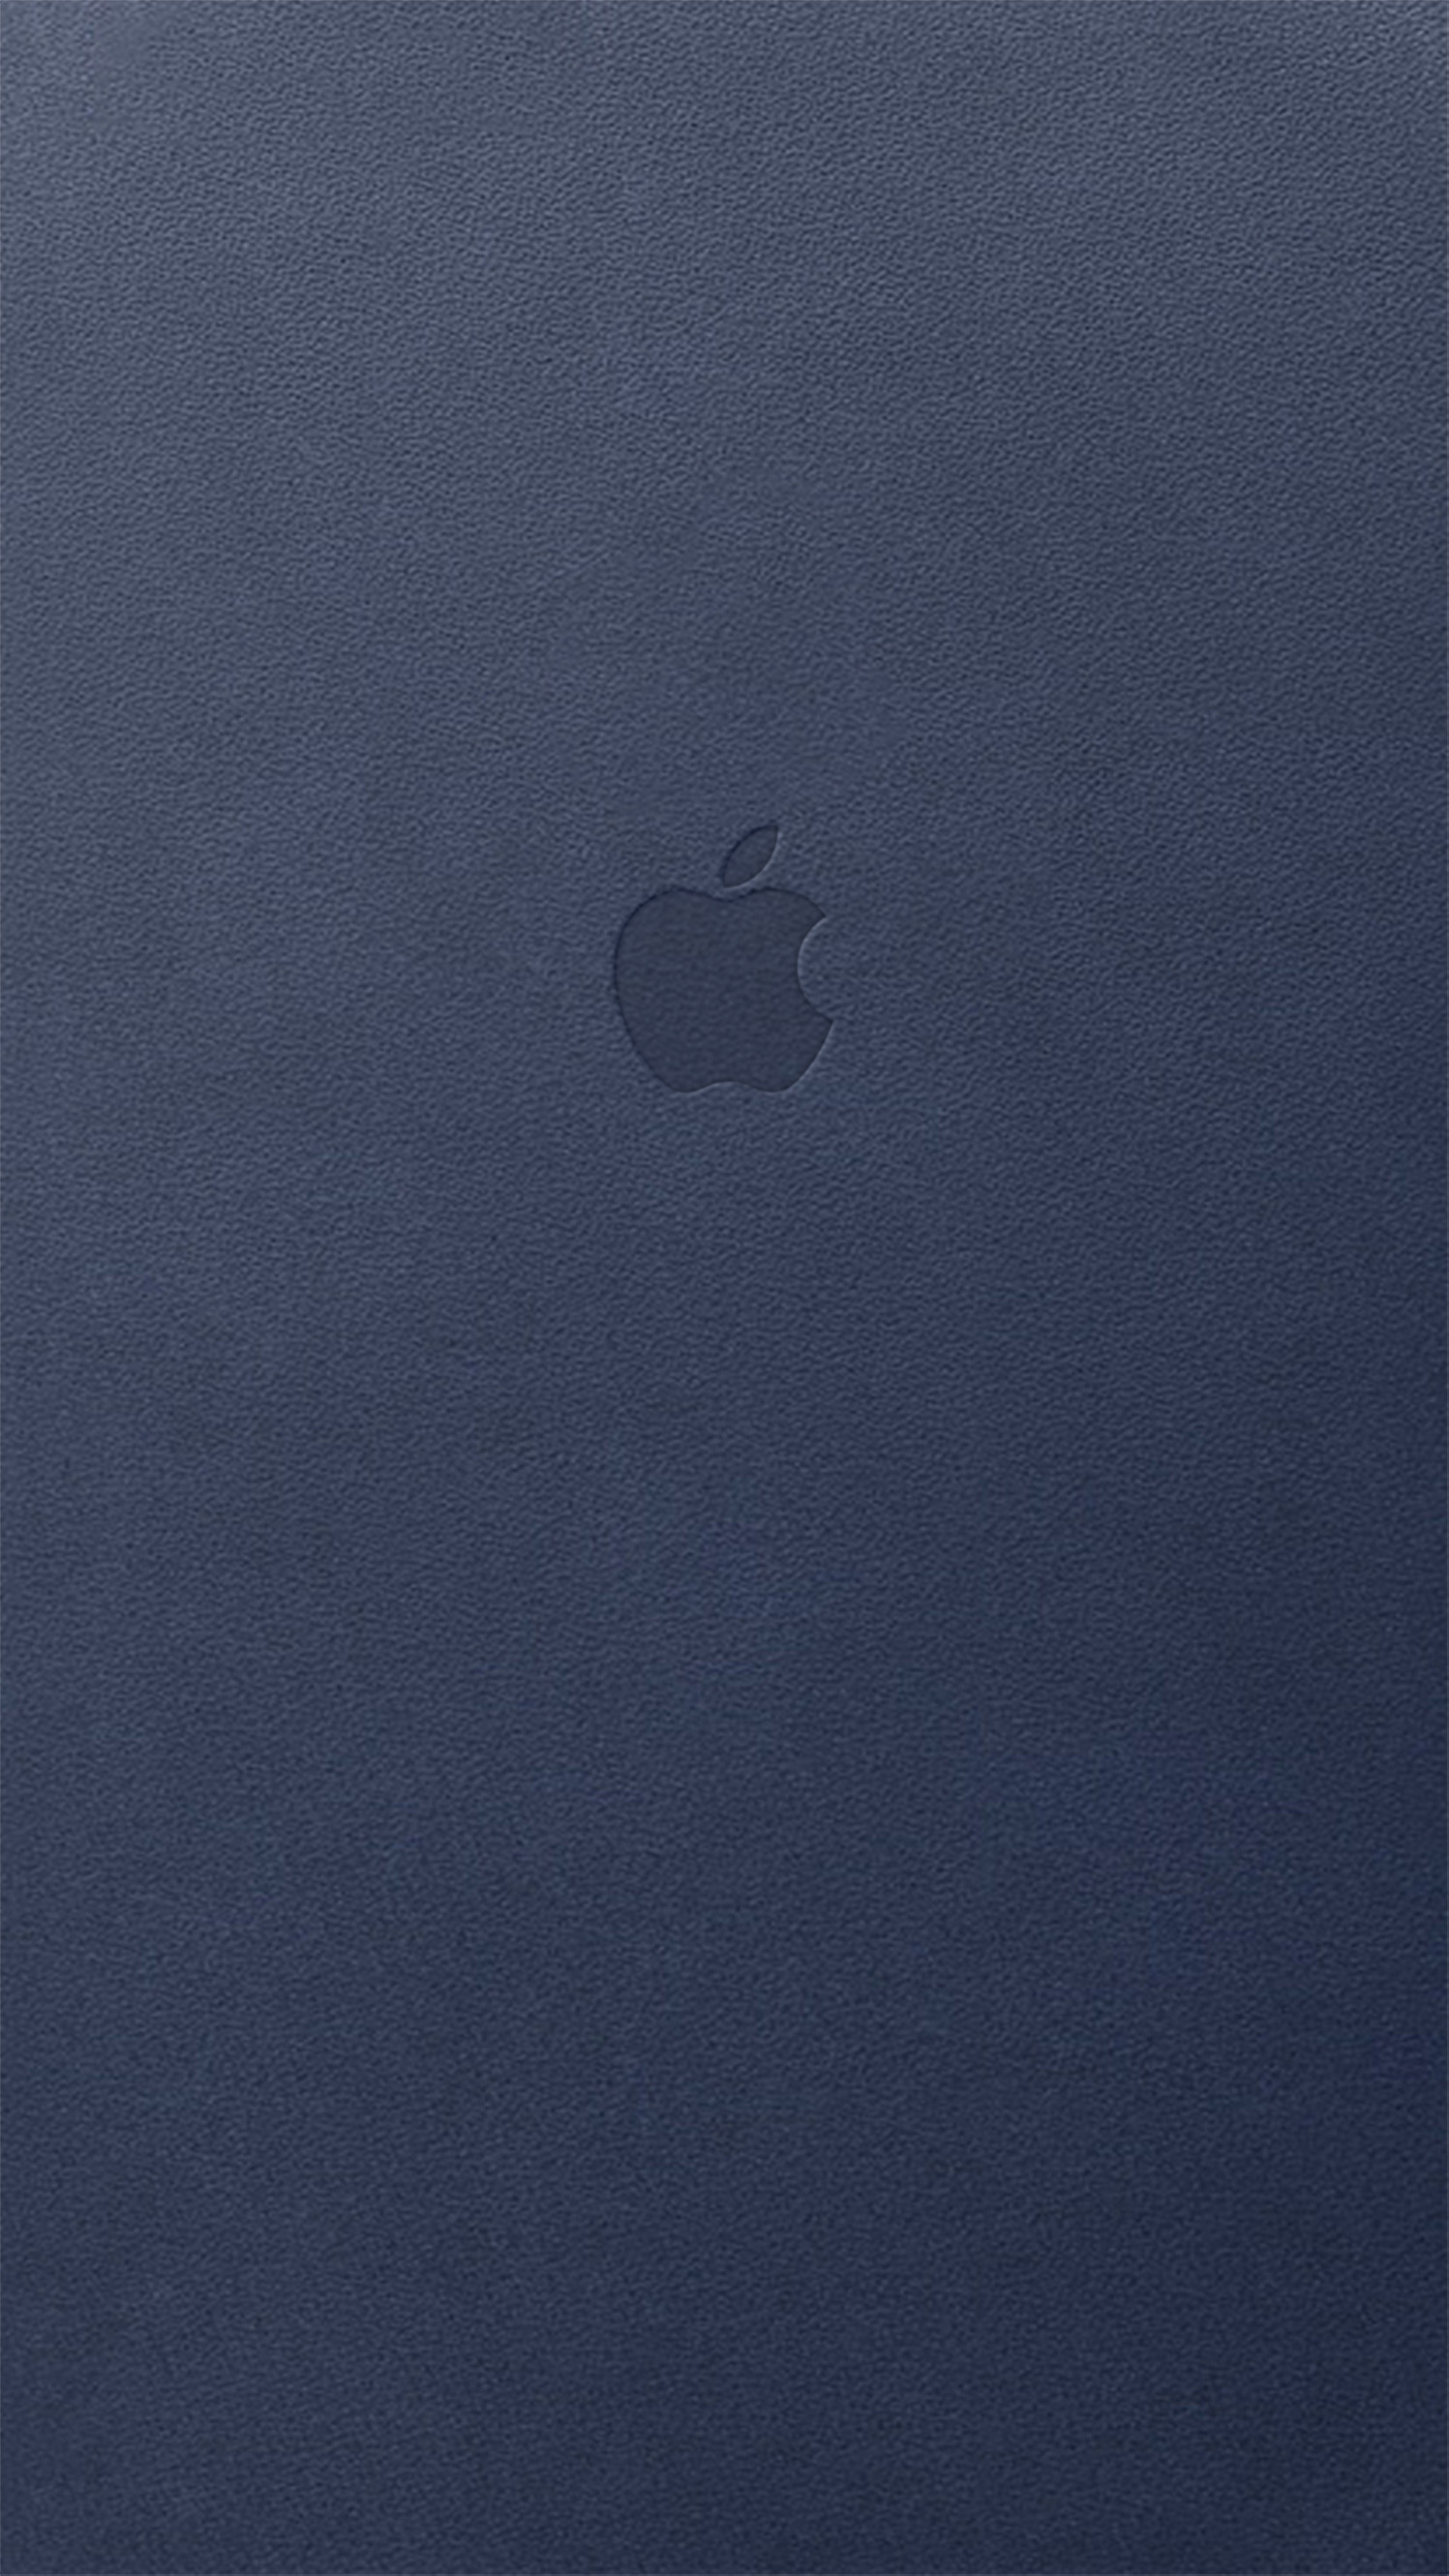 Leather Iphone Wallpaper